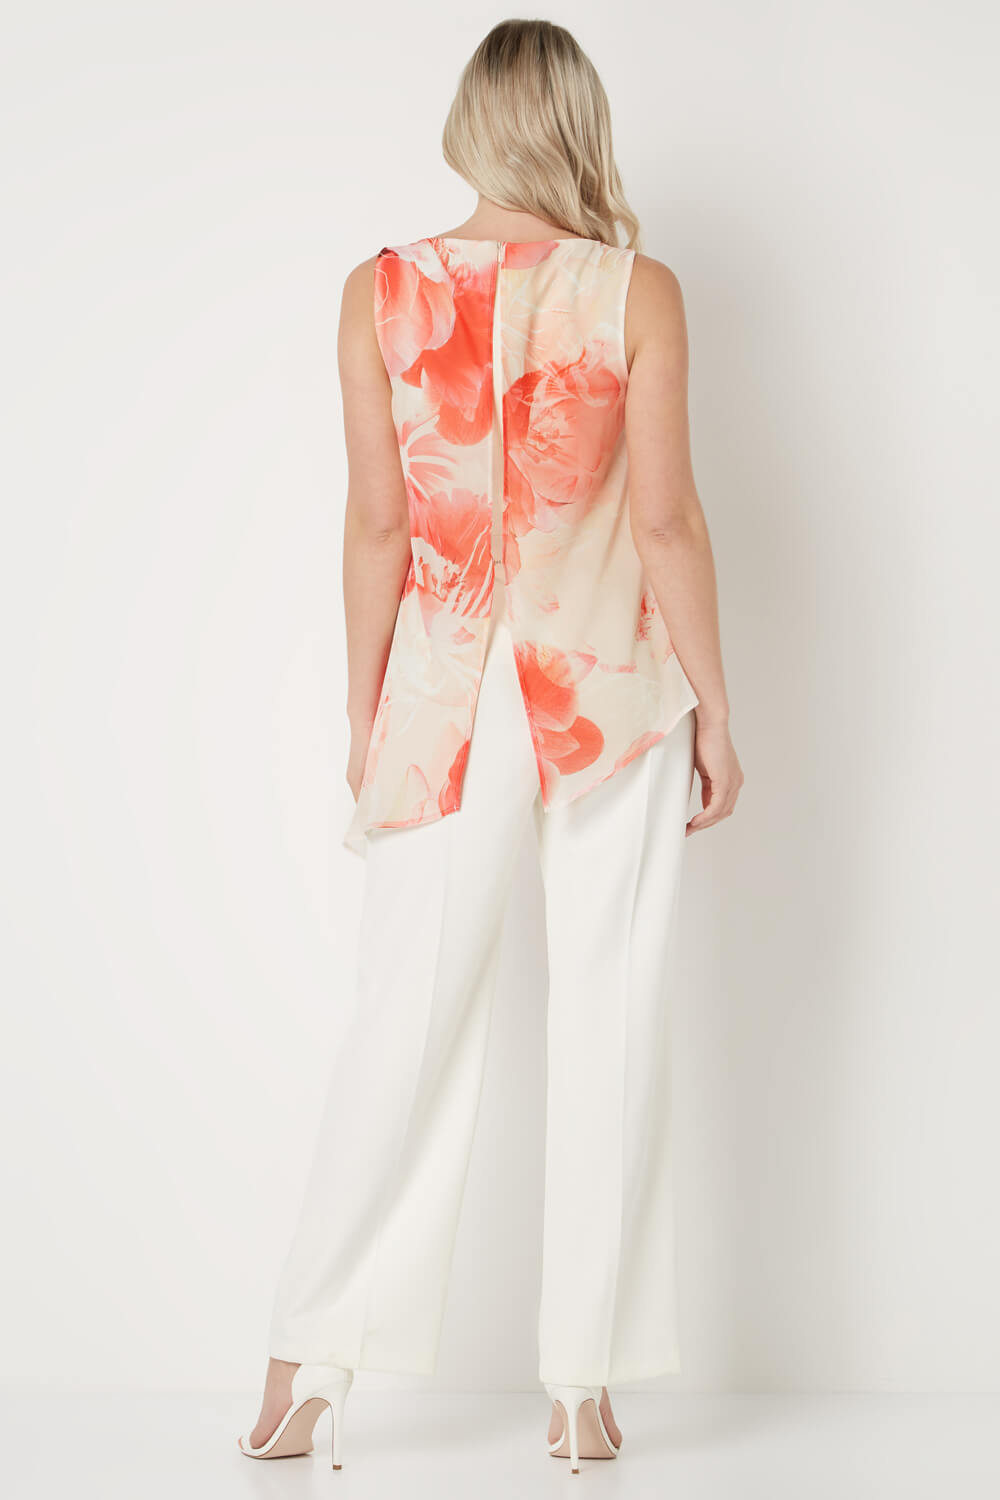 Ivory  Floral Chiffon Overlay Jumpsuit, Image 3 of 4